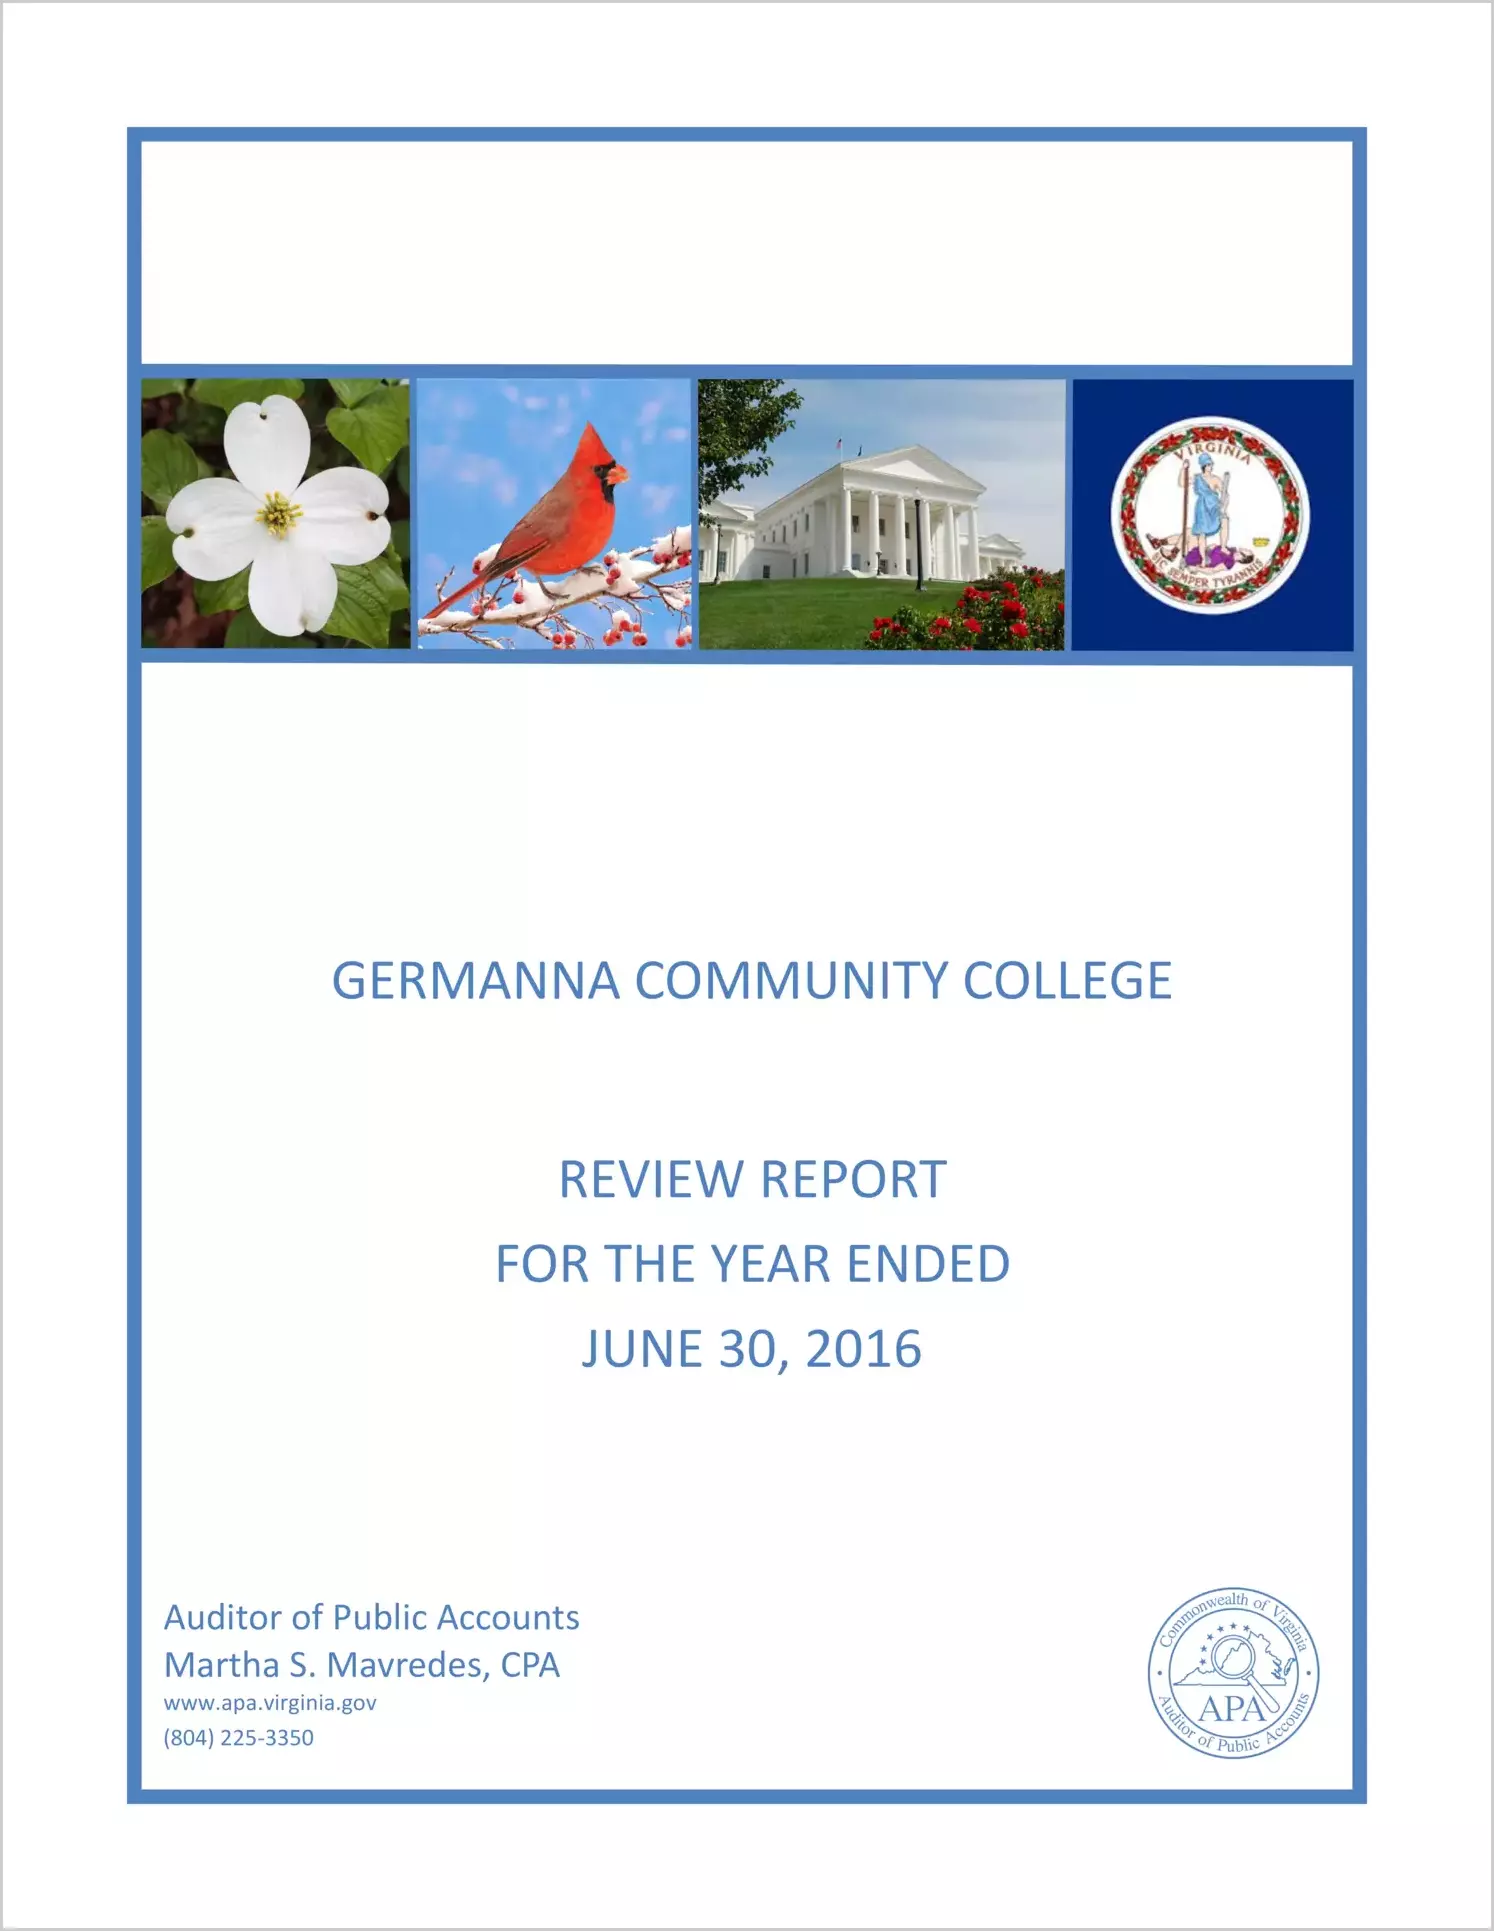 Germanna Community College Review Report for the year ended June 30, 2016